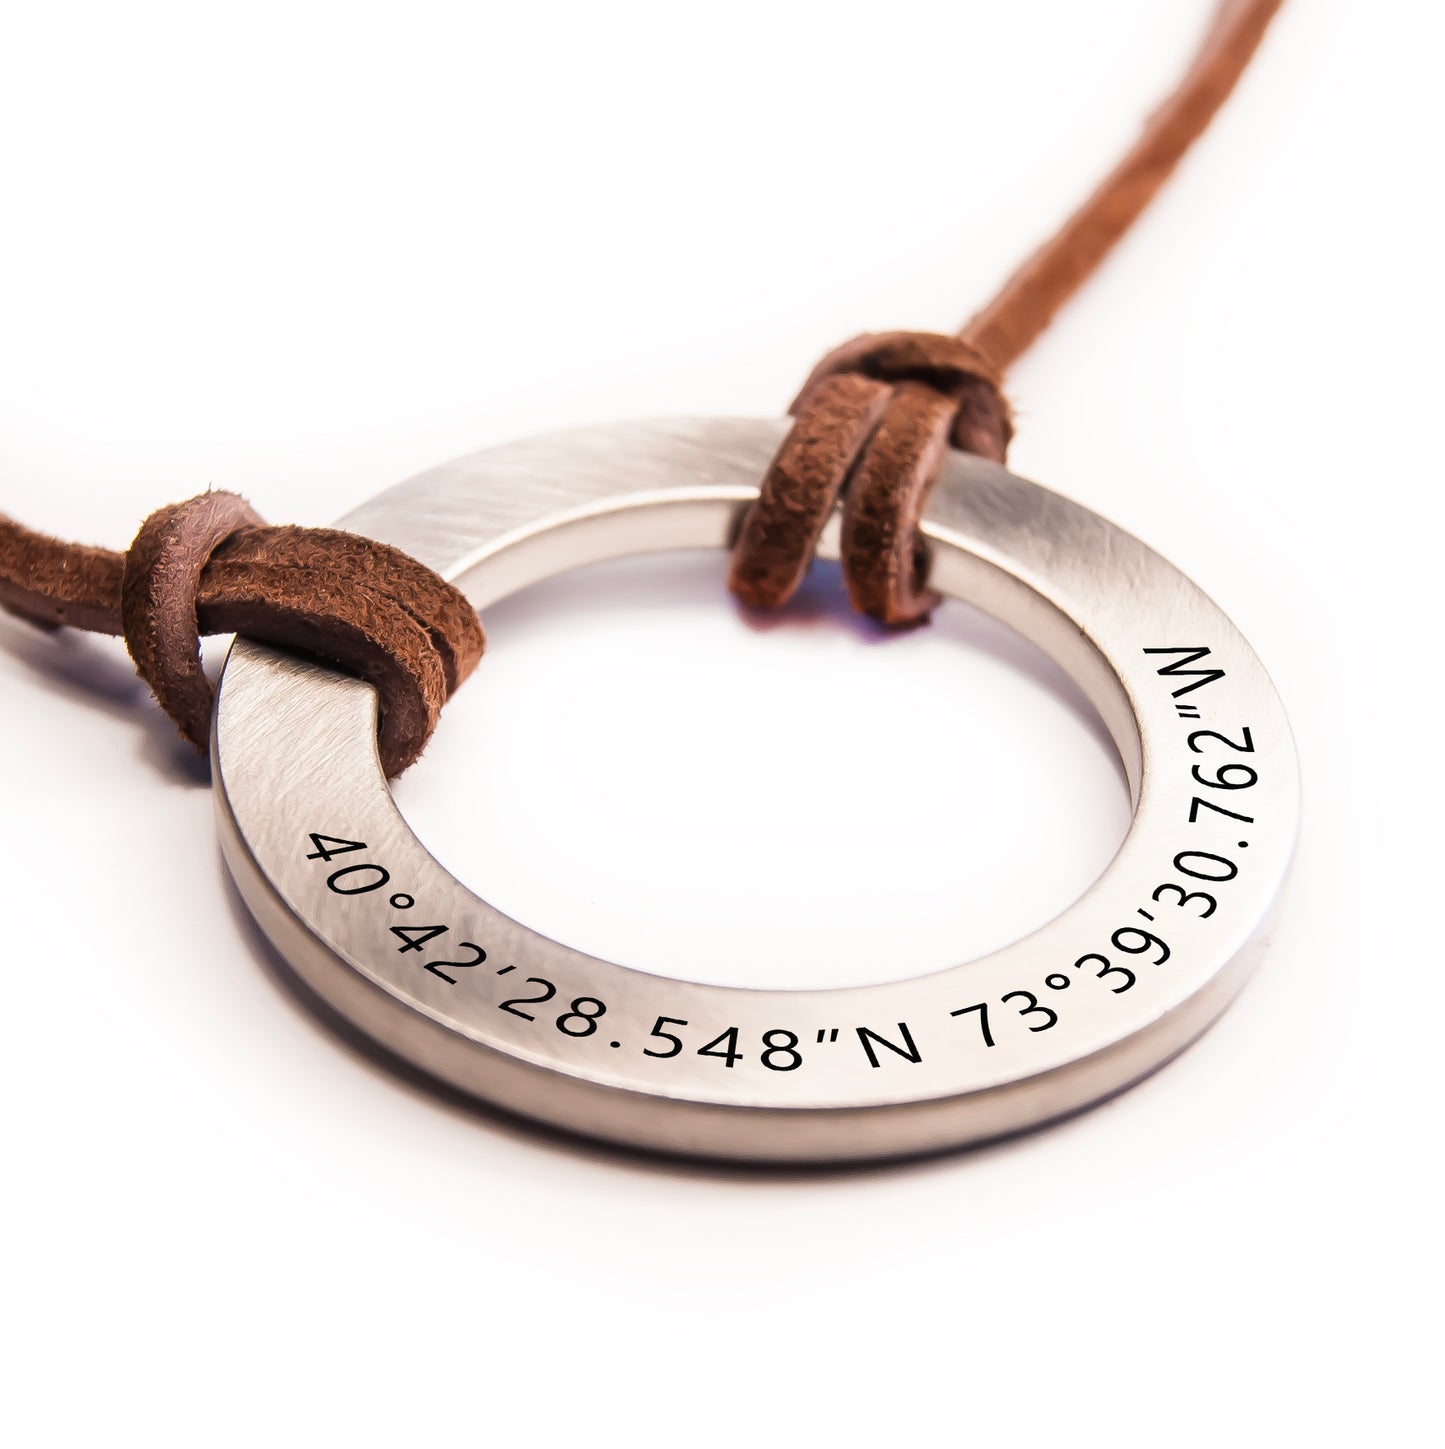 Leather Necklace for Men with Engraved Large Circle Washer Pendant - Personalized Gift for Him